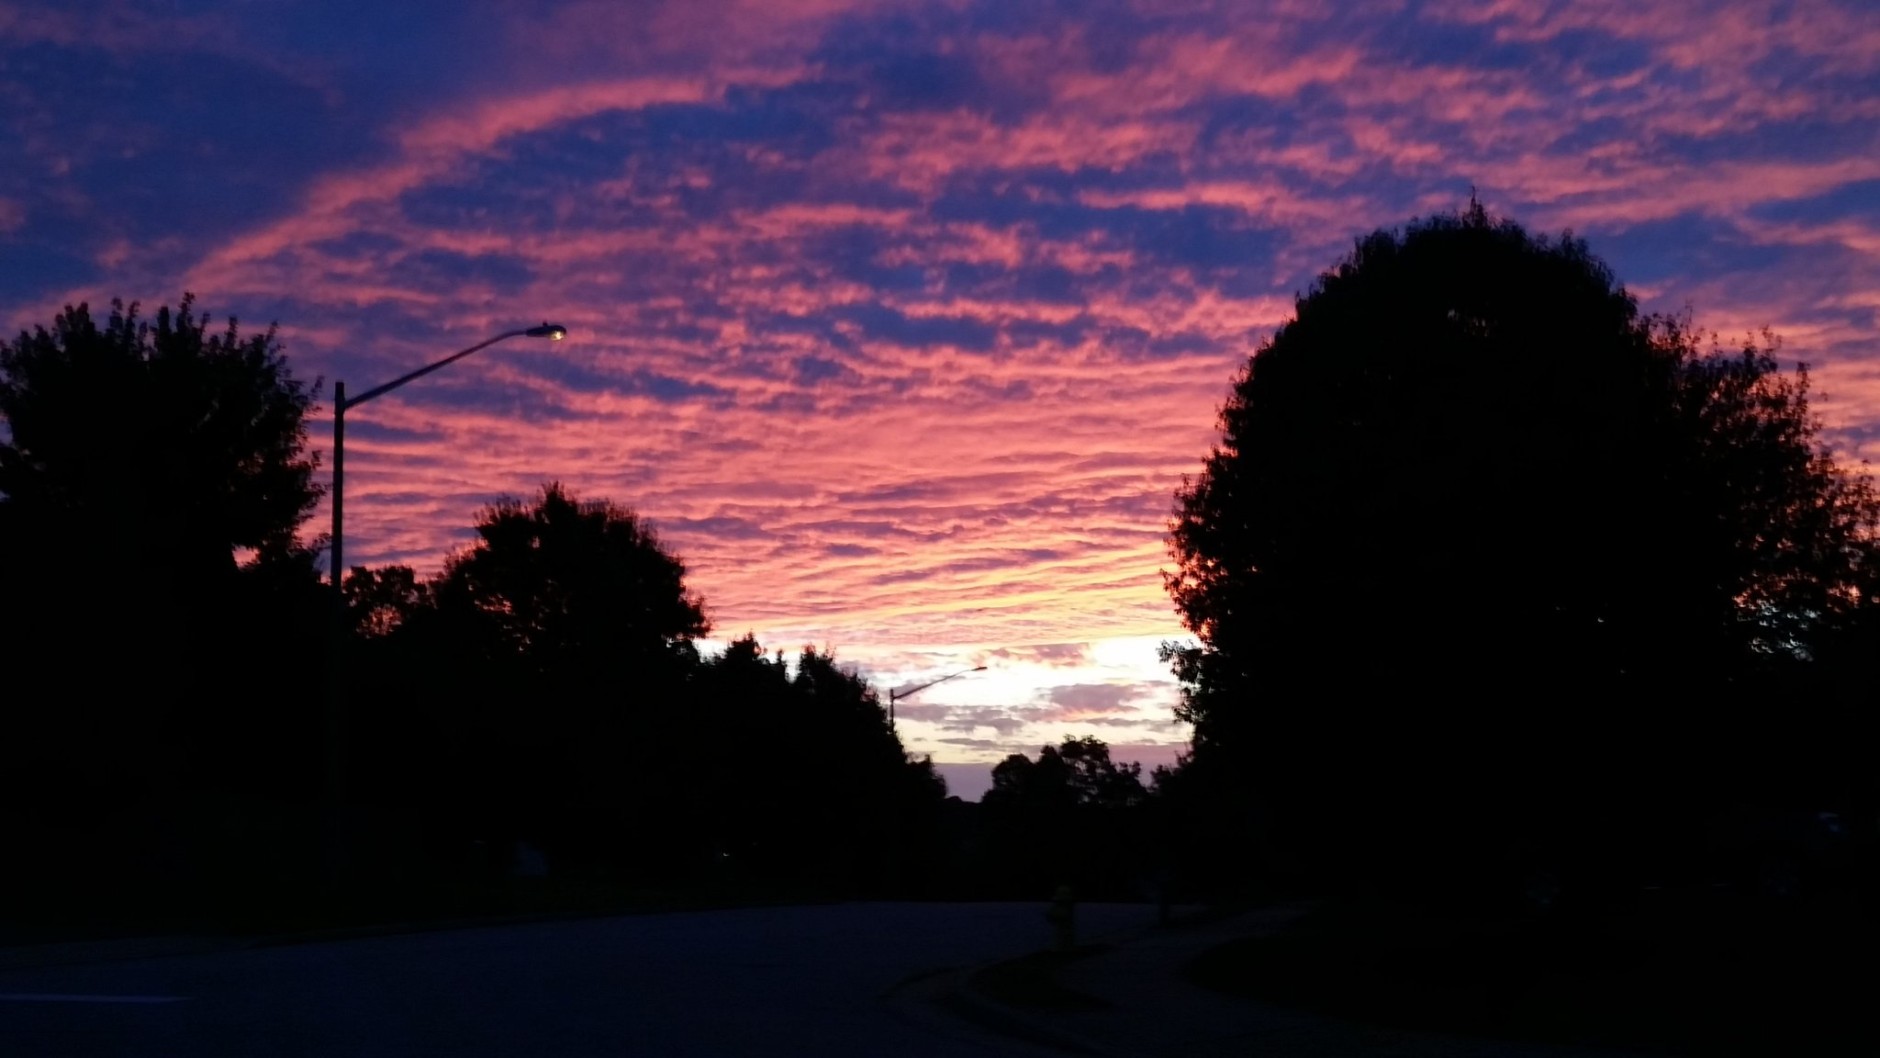 Saturday's mild weather melts into a stunning evening sky near D.C. (WTOP/Kathy Stewart)